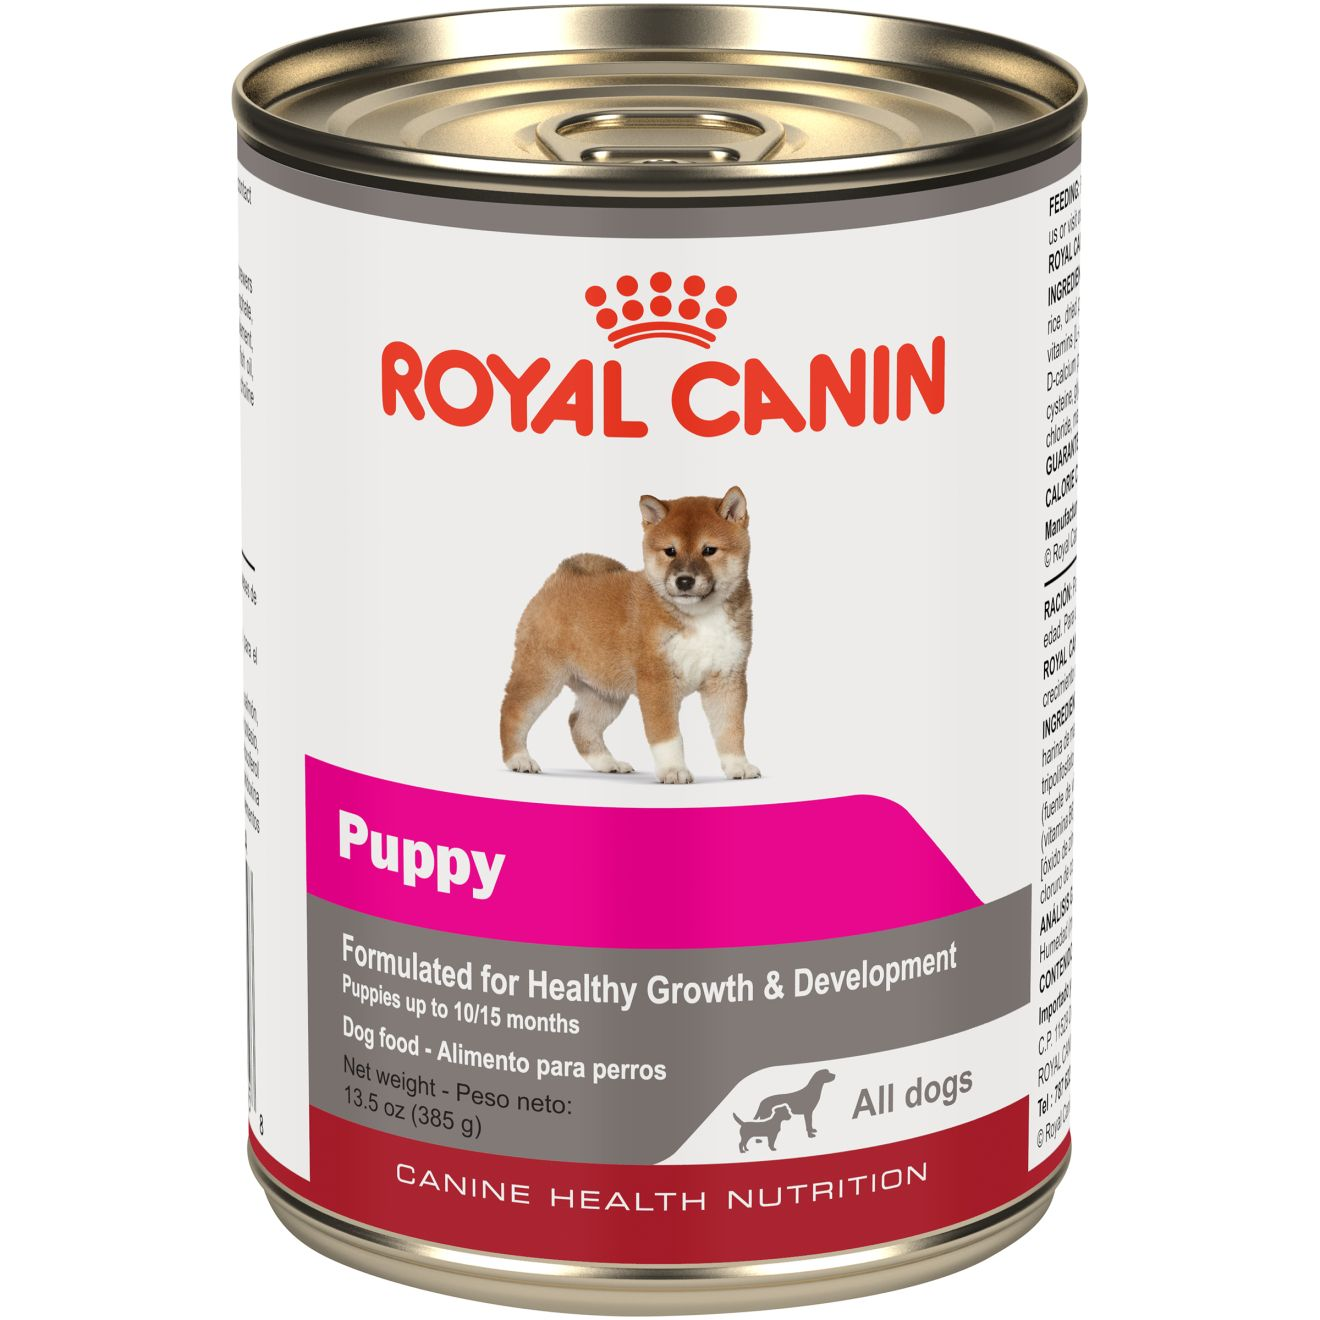 Puppy Canned Dog Food 